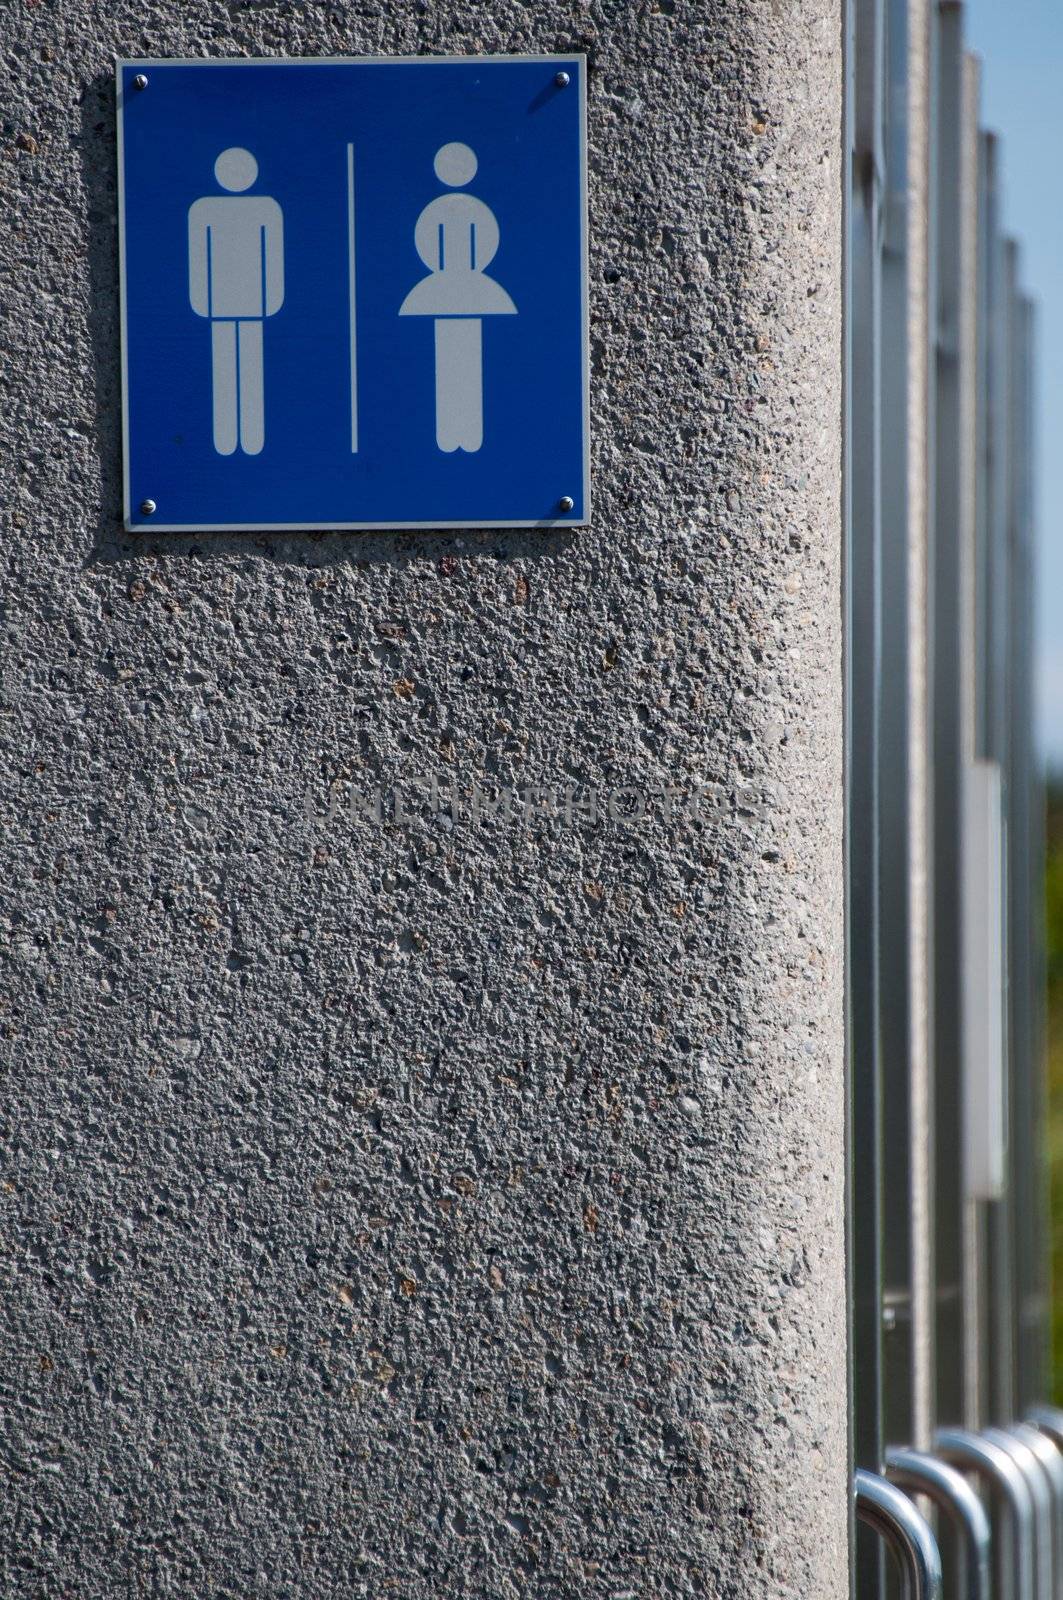 Modern unisex public toilets - sign with doors in a row